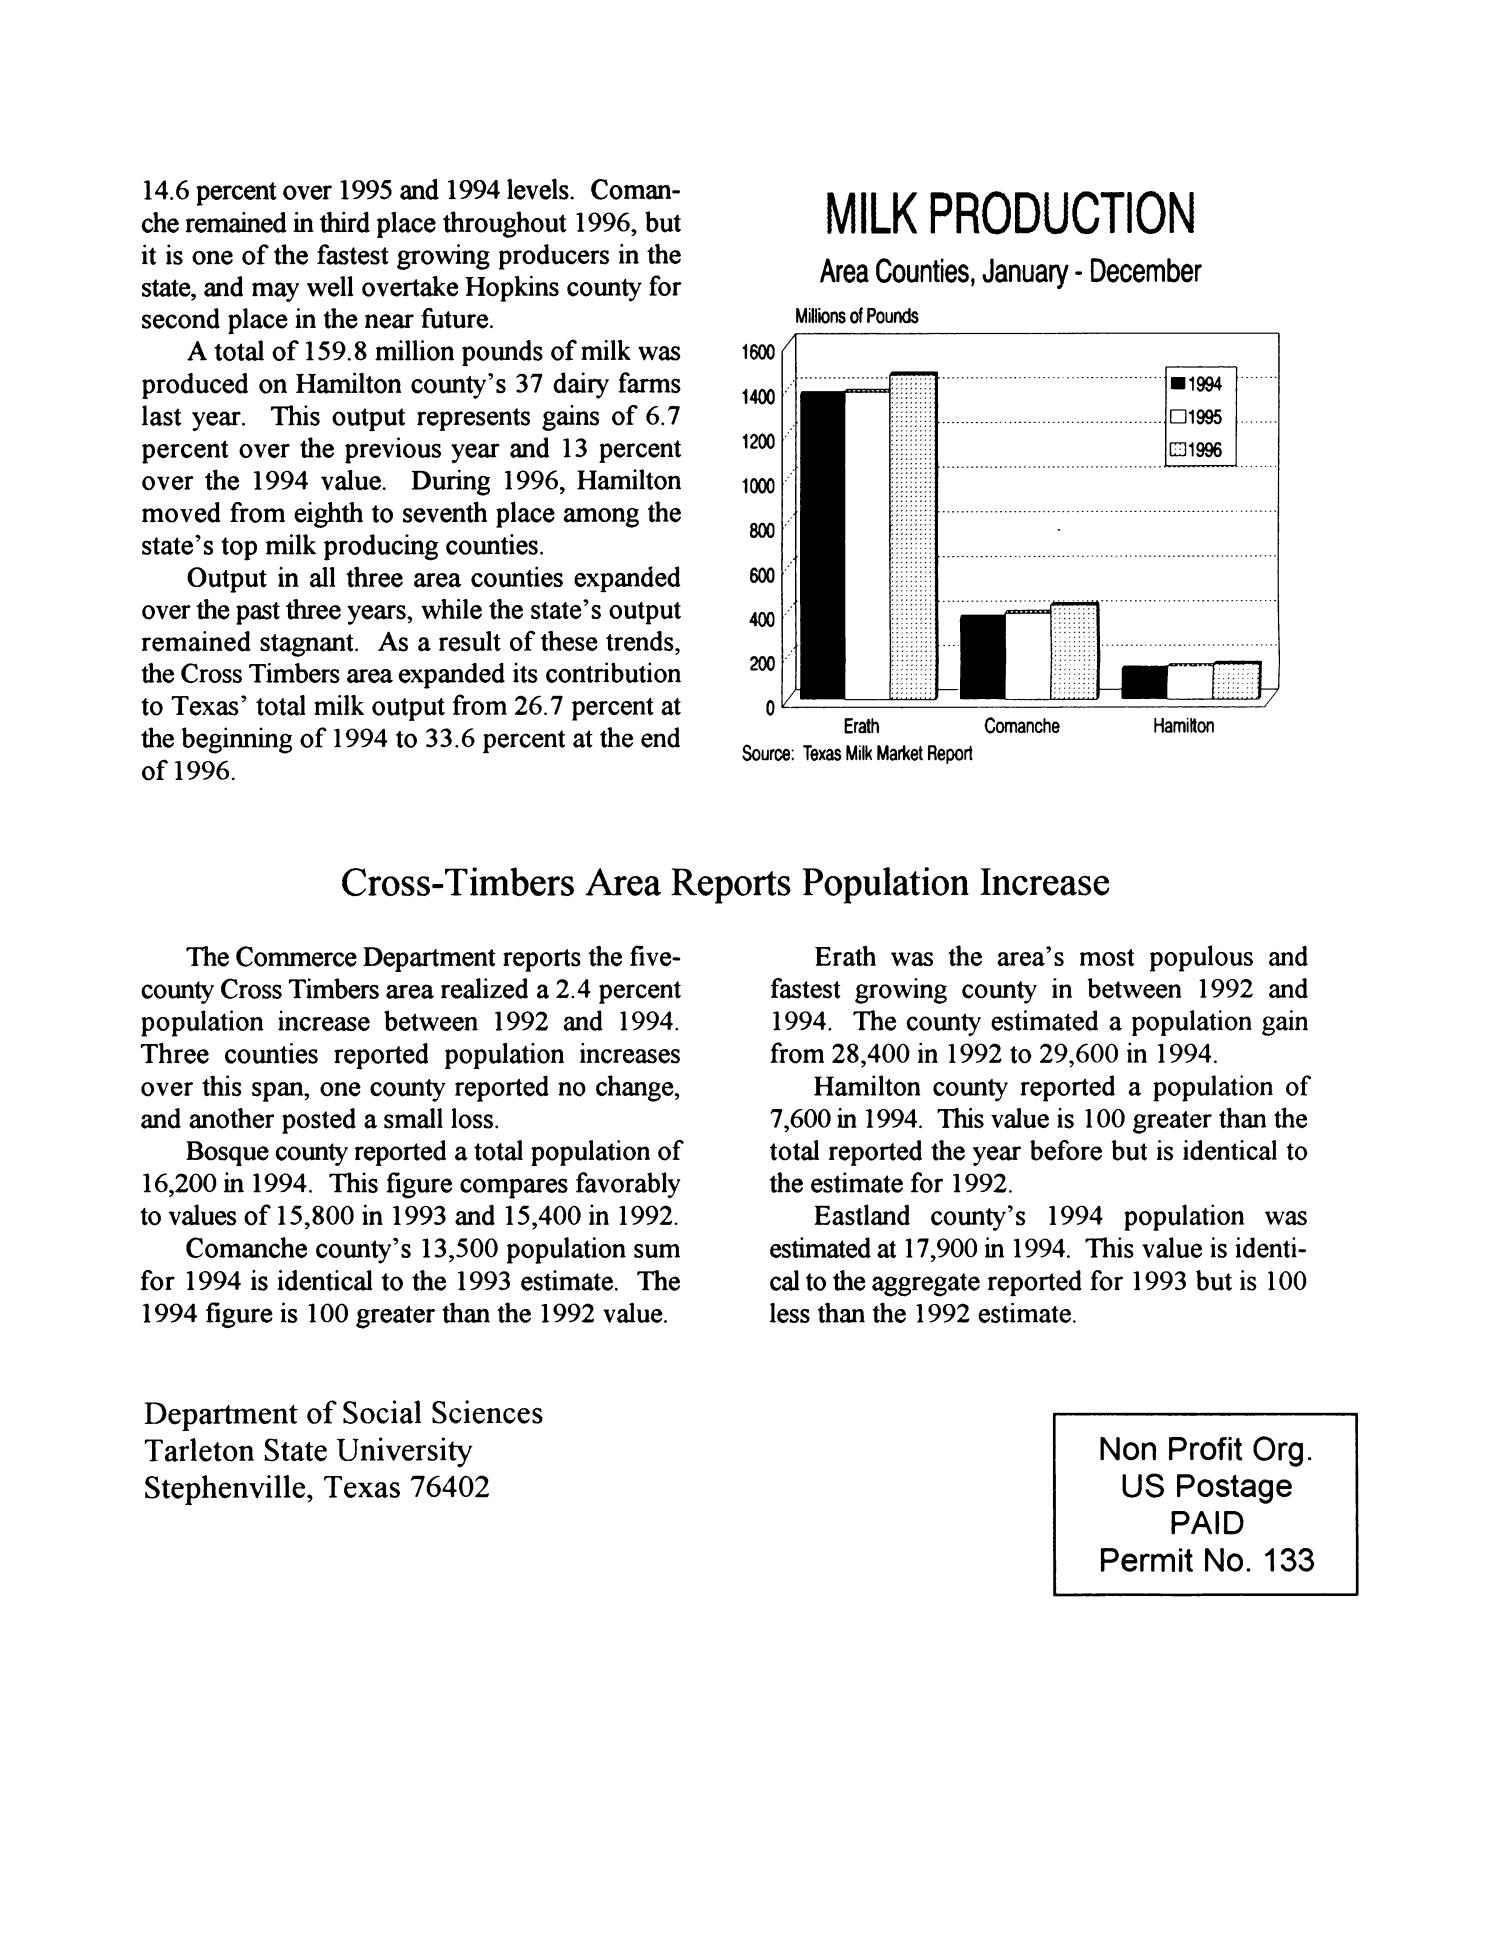 Cross Timbers Business Report, Volume 10, Number 2, Winter 1997
                                                
                                                    4
                                                